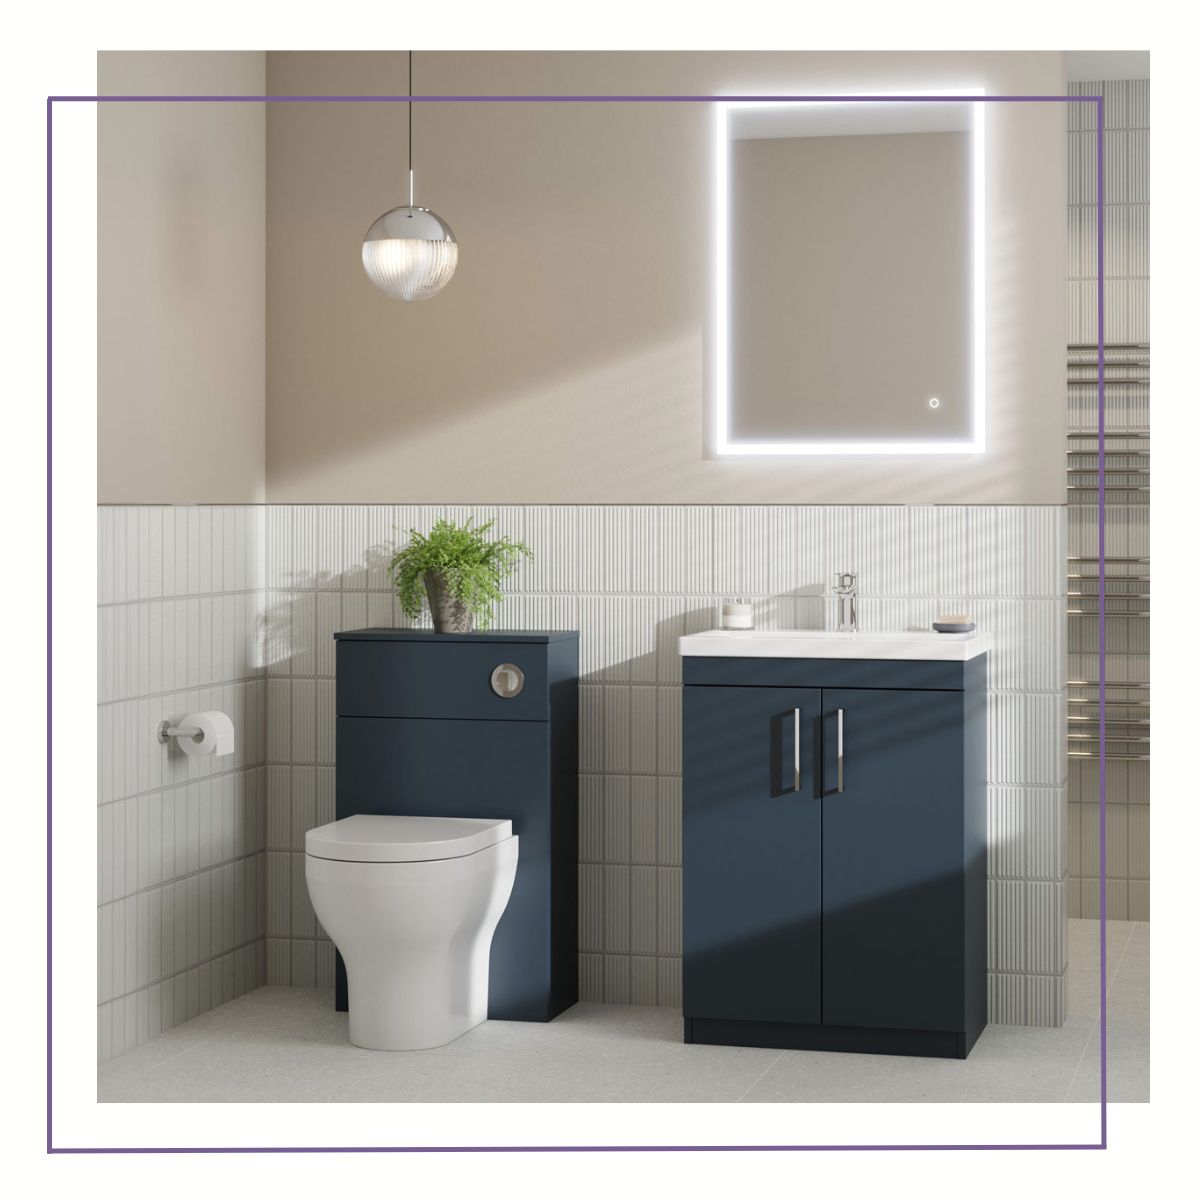 Introducing our latest obsession: Lyra Furniture! Transform your bathroom into a sanctuary of style and functionality with our sleek pieces. Lyra offers endless possibilities to elevate your bathroom. From sophisticated neutrals to bold statement hues bathroomsupastore.com/lyra-modular-f…